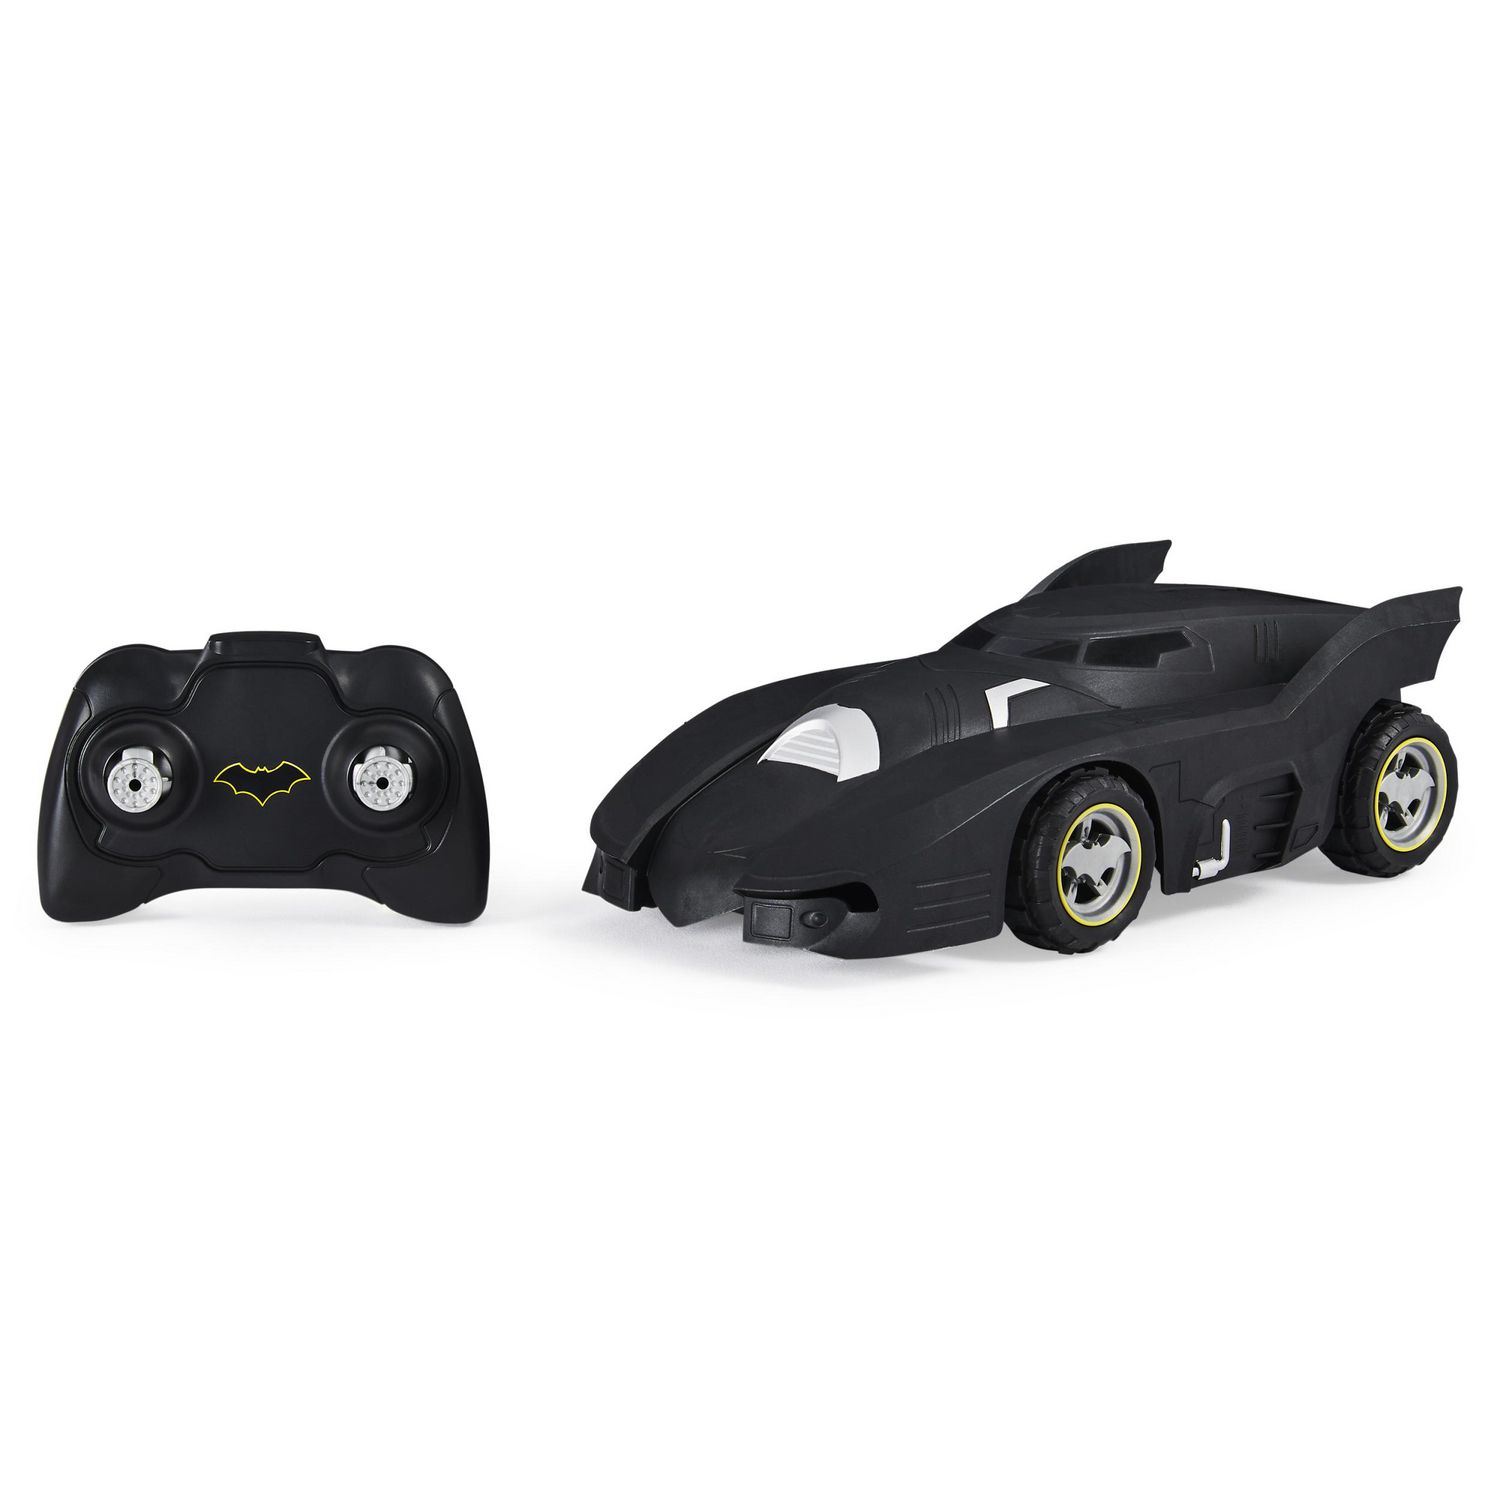 BATMAN Batmobile Remote Control Vehicle 1:20 Scale, Kids Toys for Boys Aged  4 and up | Walmart Canada